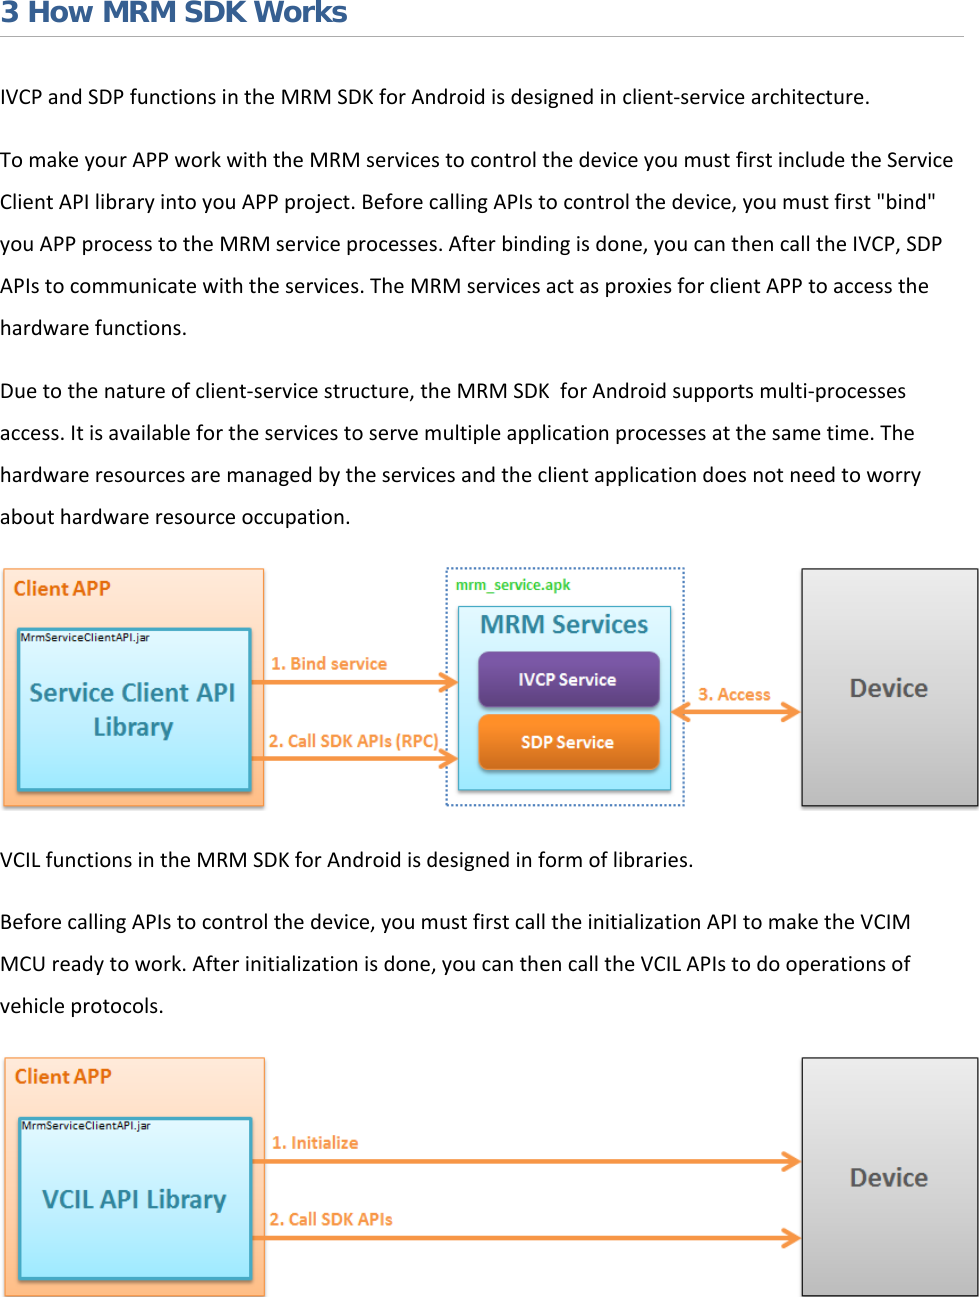    3 How MRM SDK Works IVCP and SDP functions in the MRM SDK for Android is designed in client-service architecture.  To make your APP work with the MRM services to control the device you must first include the Service Client API library into you APP project. Before calling APIs to control the device, you must first &quot;bind&quot; you APP process to the MRM service processes. After binding is done, you can then call the IVCP, SDP APIs to communicate with the services. The MRM services act as proxies for client APP to access the hardware functions. Due to the nature of client-service structure, the MRM SDK  for Android supports multi-processes access. It is available for the services to serve multiple application processes at the same time. The hardware resources are managed by the services and the client application does not need to worry about hardware resource occupation.  VCIL functions in the MRM SDK for Android is designed in form of libraries. Before calling APIs to control the device, you must first call the initialization API to make the VCIM MCU ready to work. After initialization is done, you can then call the VCIL APIs to do operations of vehicle protocols.    